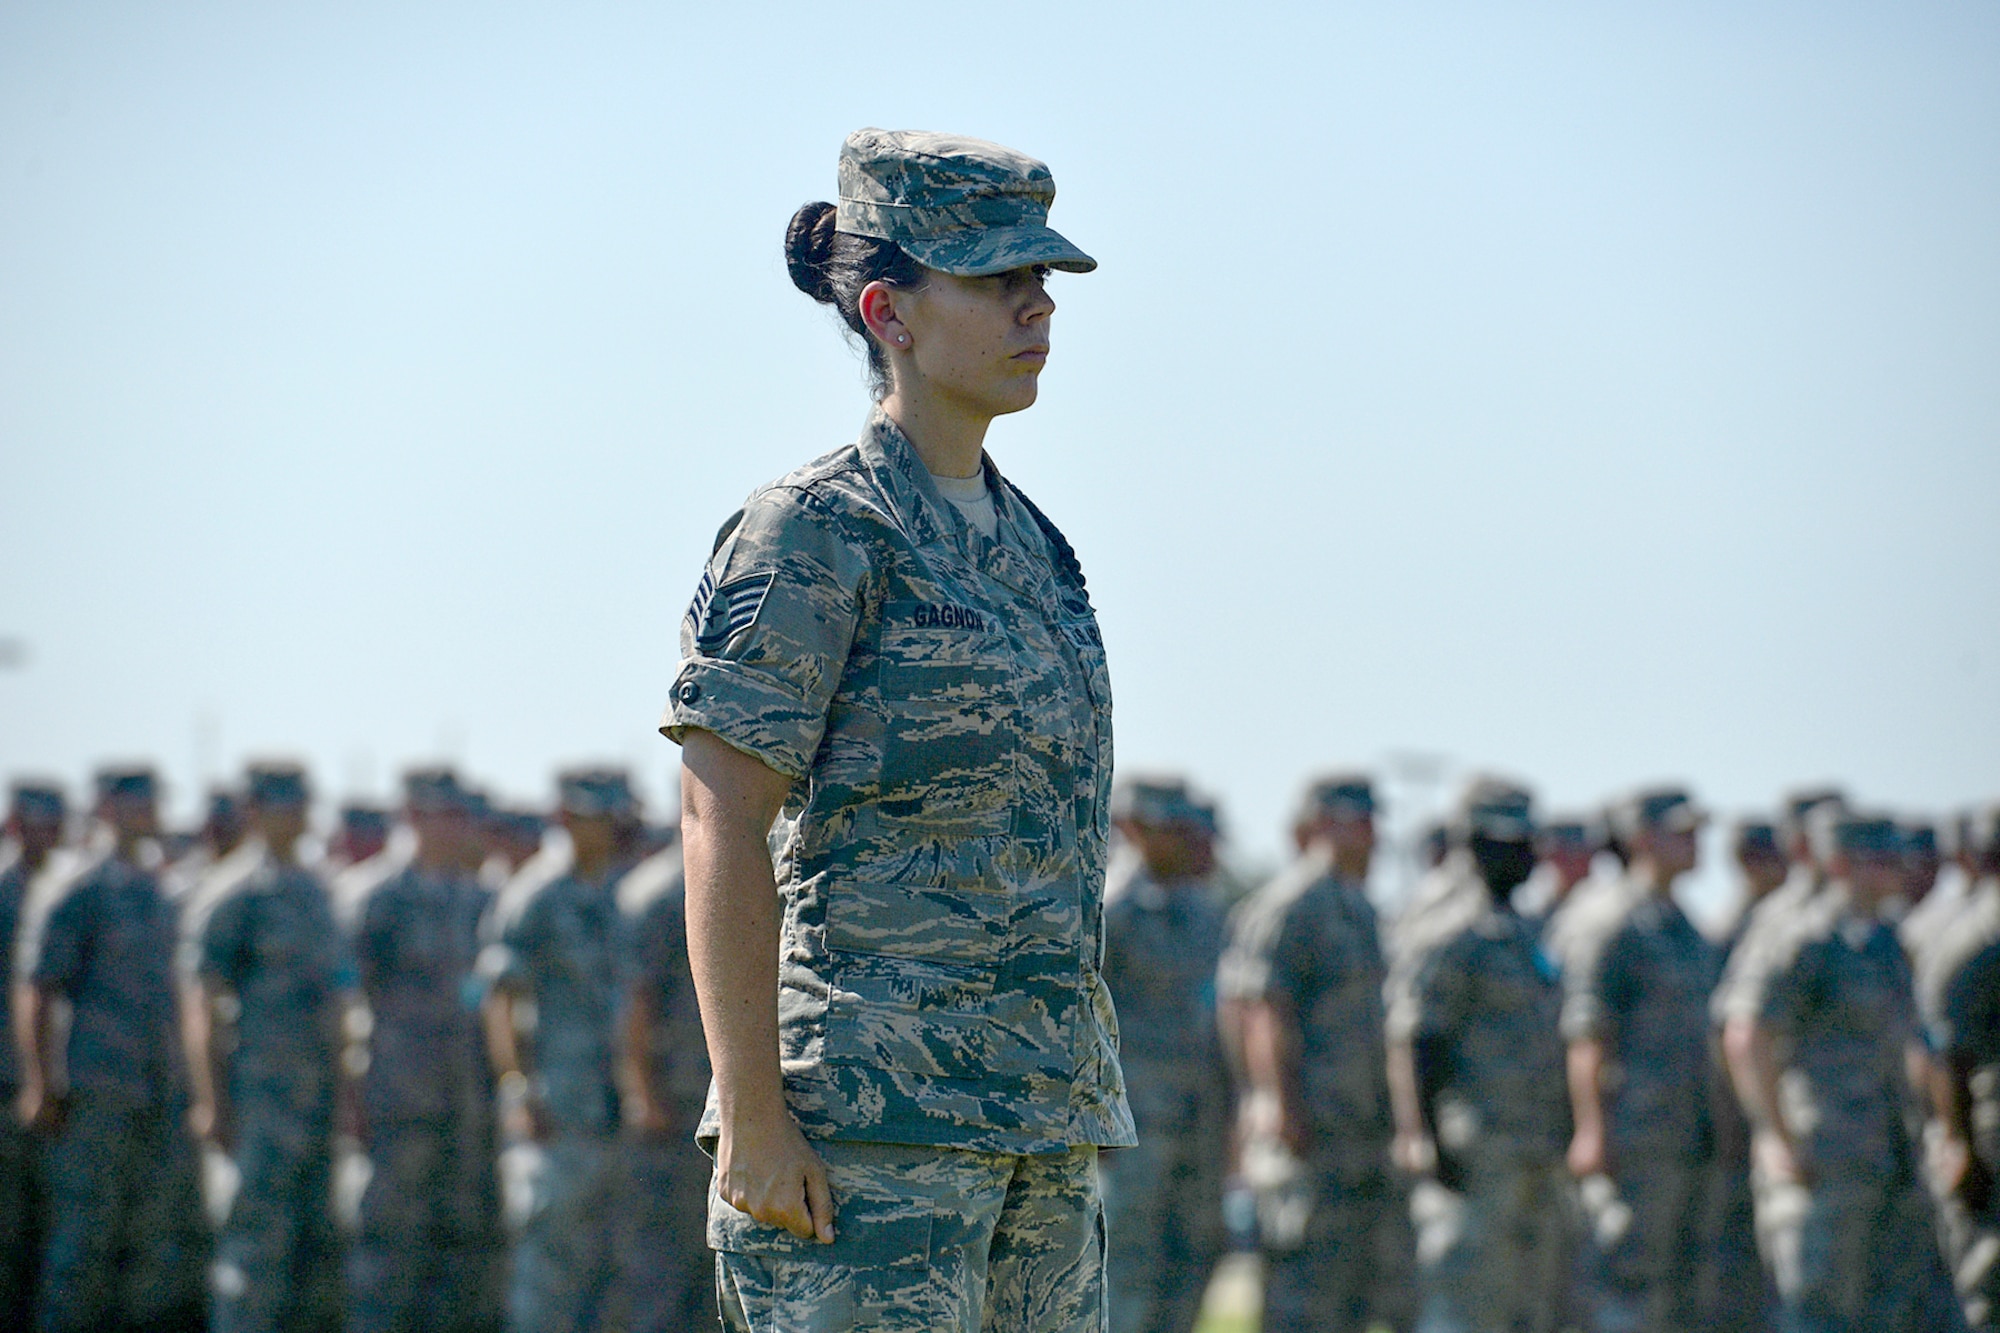 U.S. Air Force Staff Sgt. Amber Gagnon, 316th Training Squadron Military Training Leader, leads students during retreat at the parade field on Goodfellow Air Force Base, Texas, June 17, 2016. Retreat marks the end of the duty day on military bases. (U.S. Air Force photo by Airman 1st Class Randall Moose/Released)